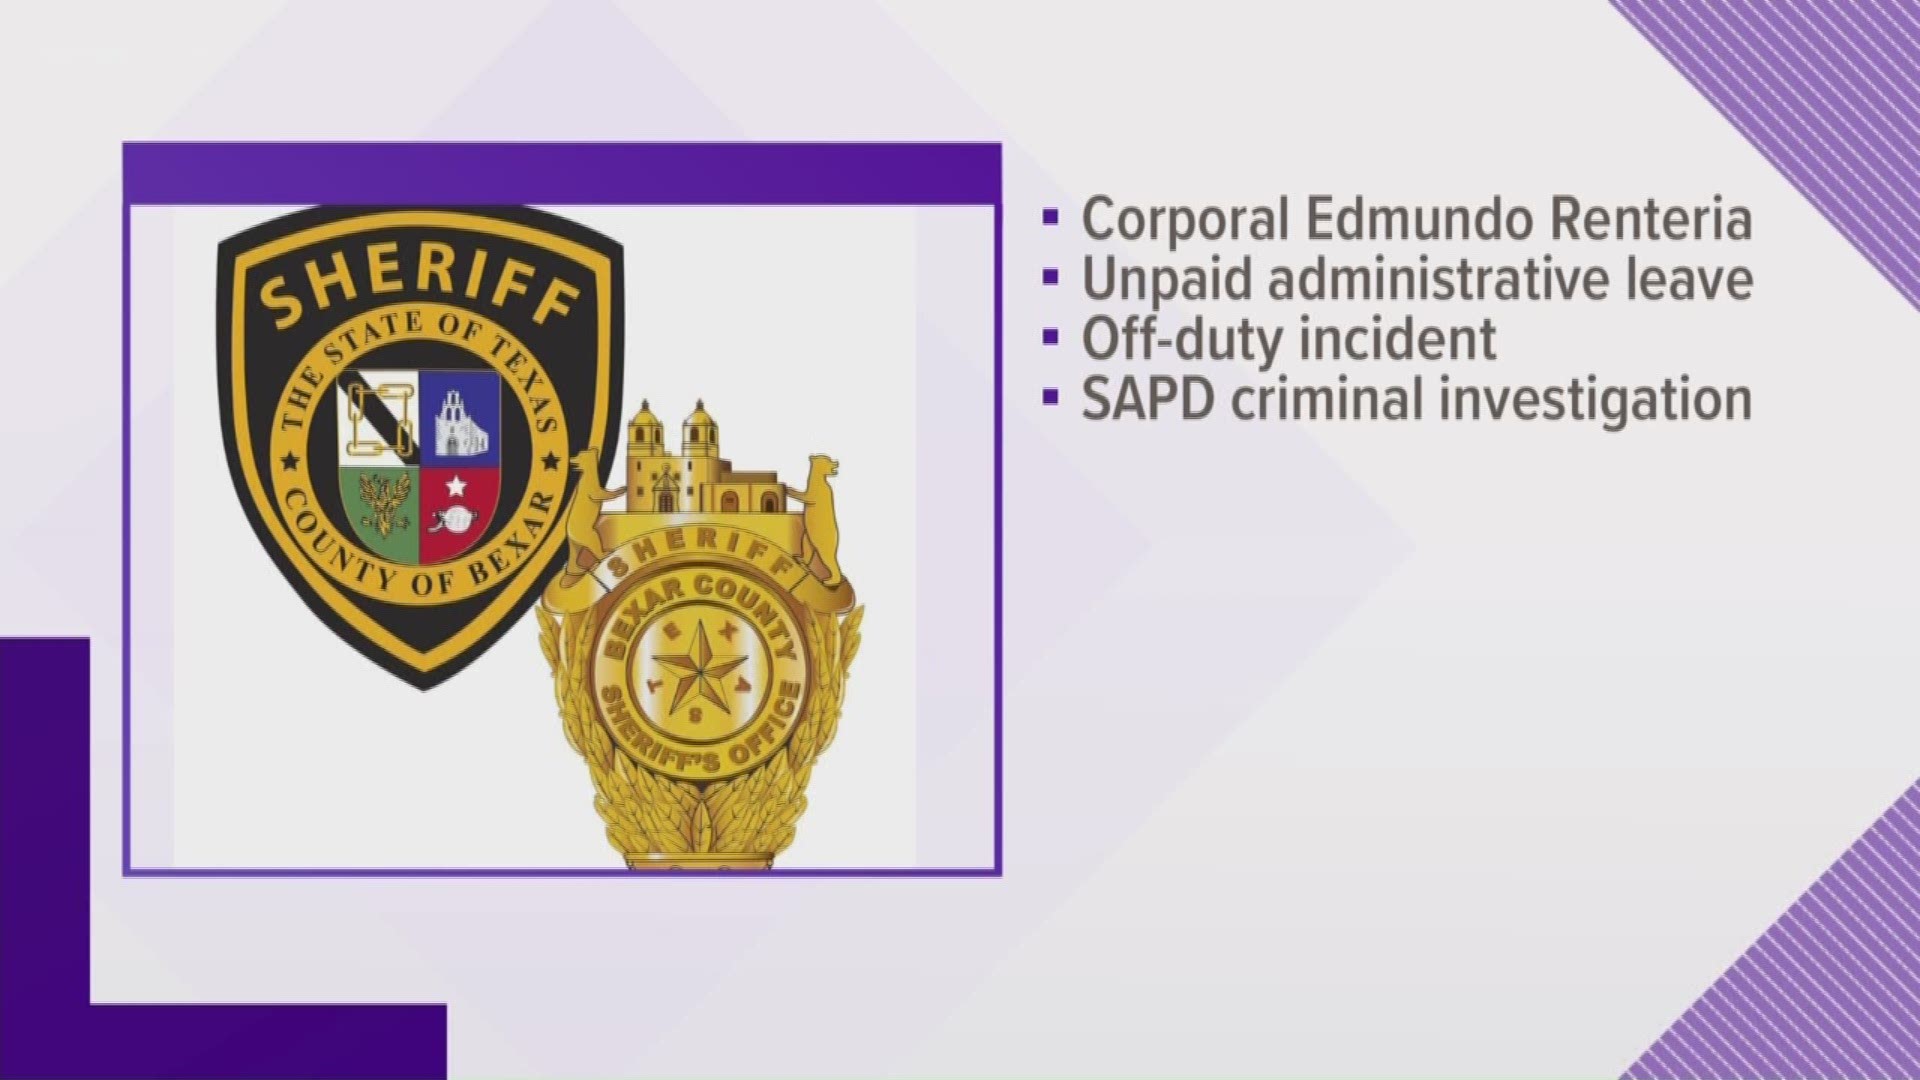 Corporal Edmundo Renteria's credentials and all department-issued equipment have been seized.